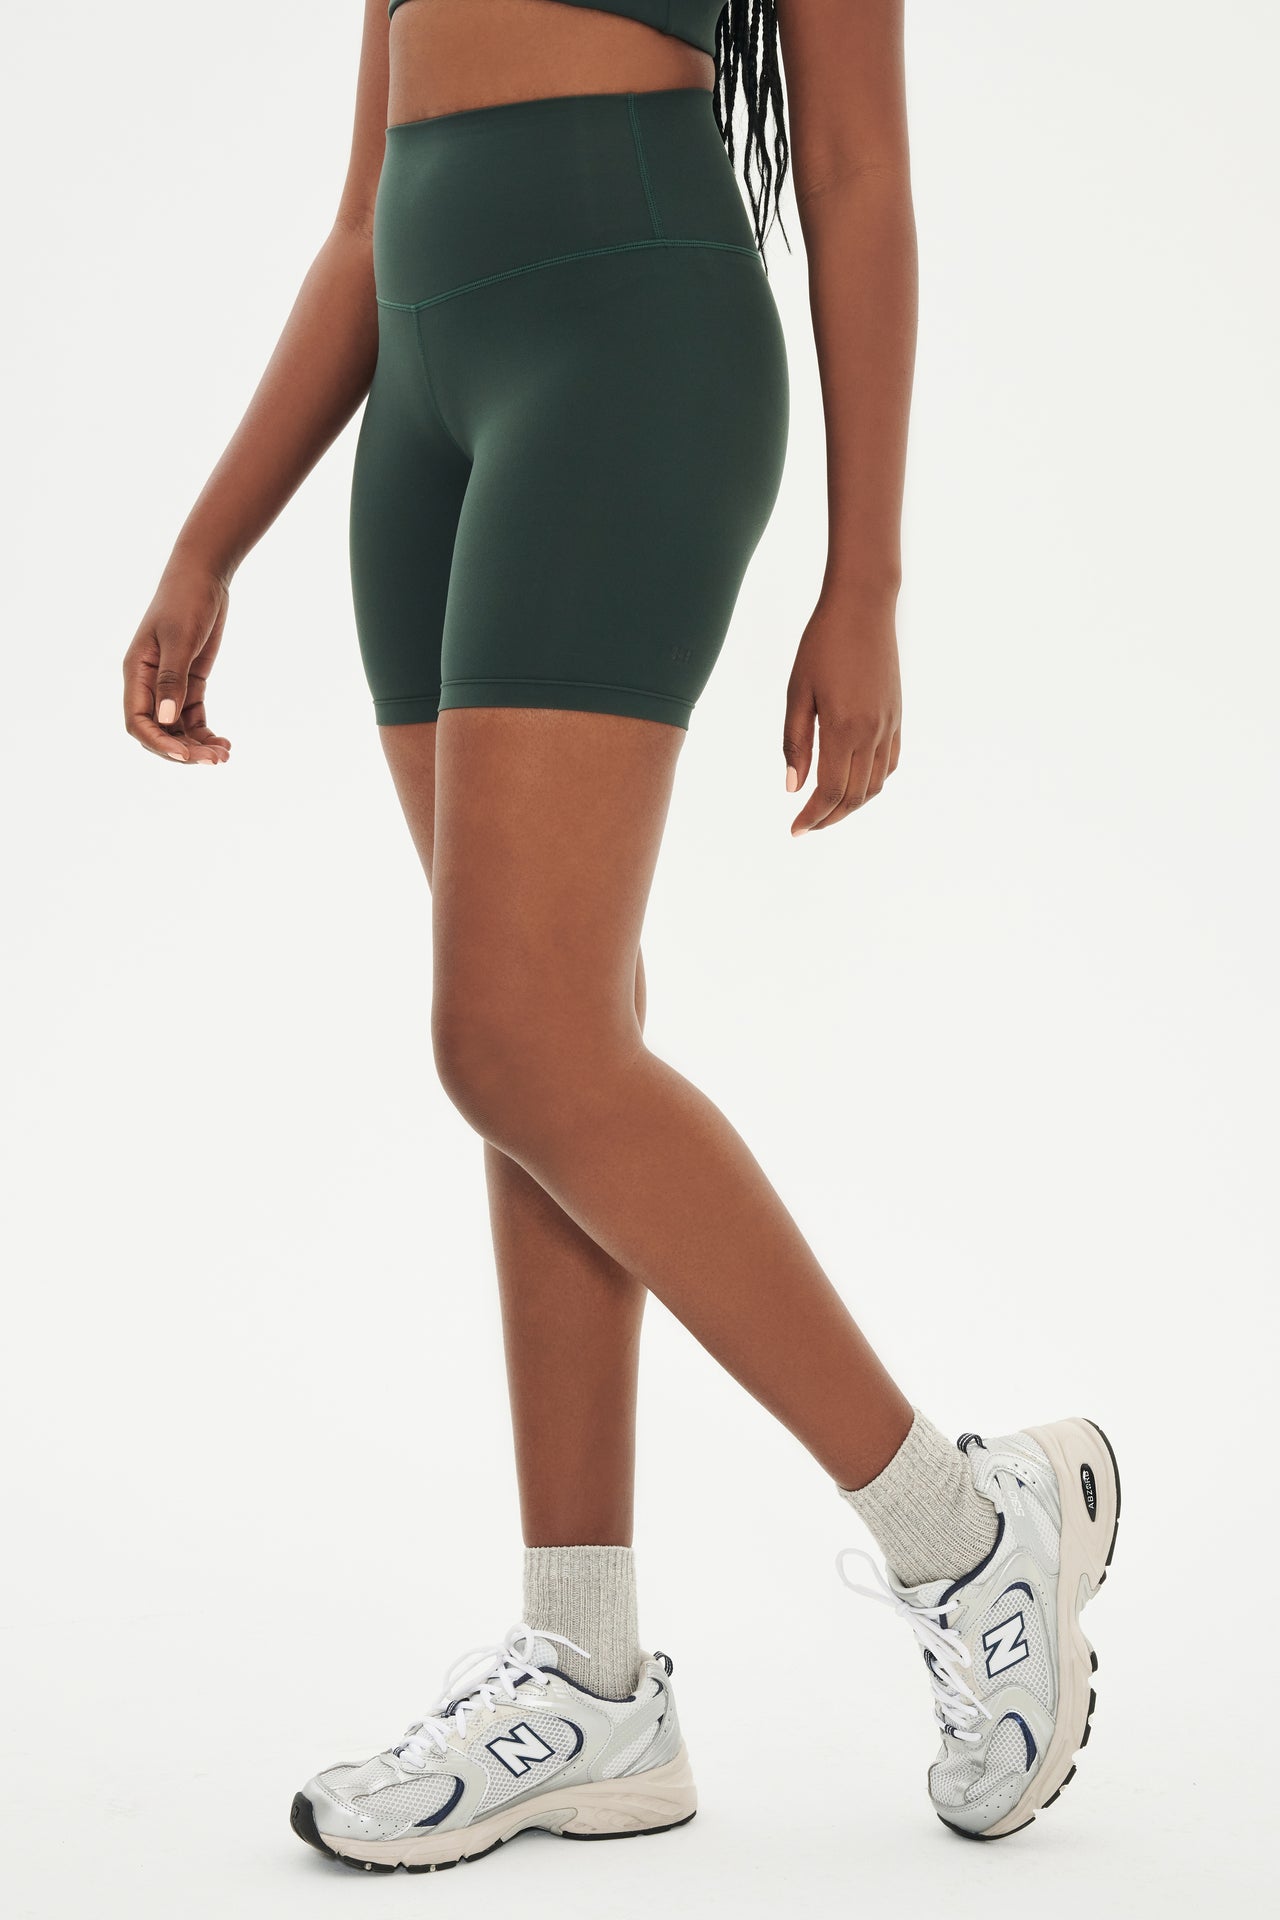 Side view of girl wearing highwaisted mid thigh dark green bike shorts with white shoes